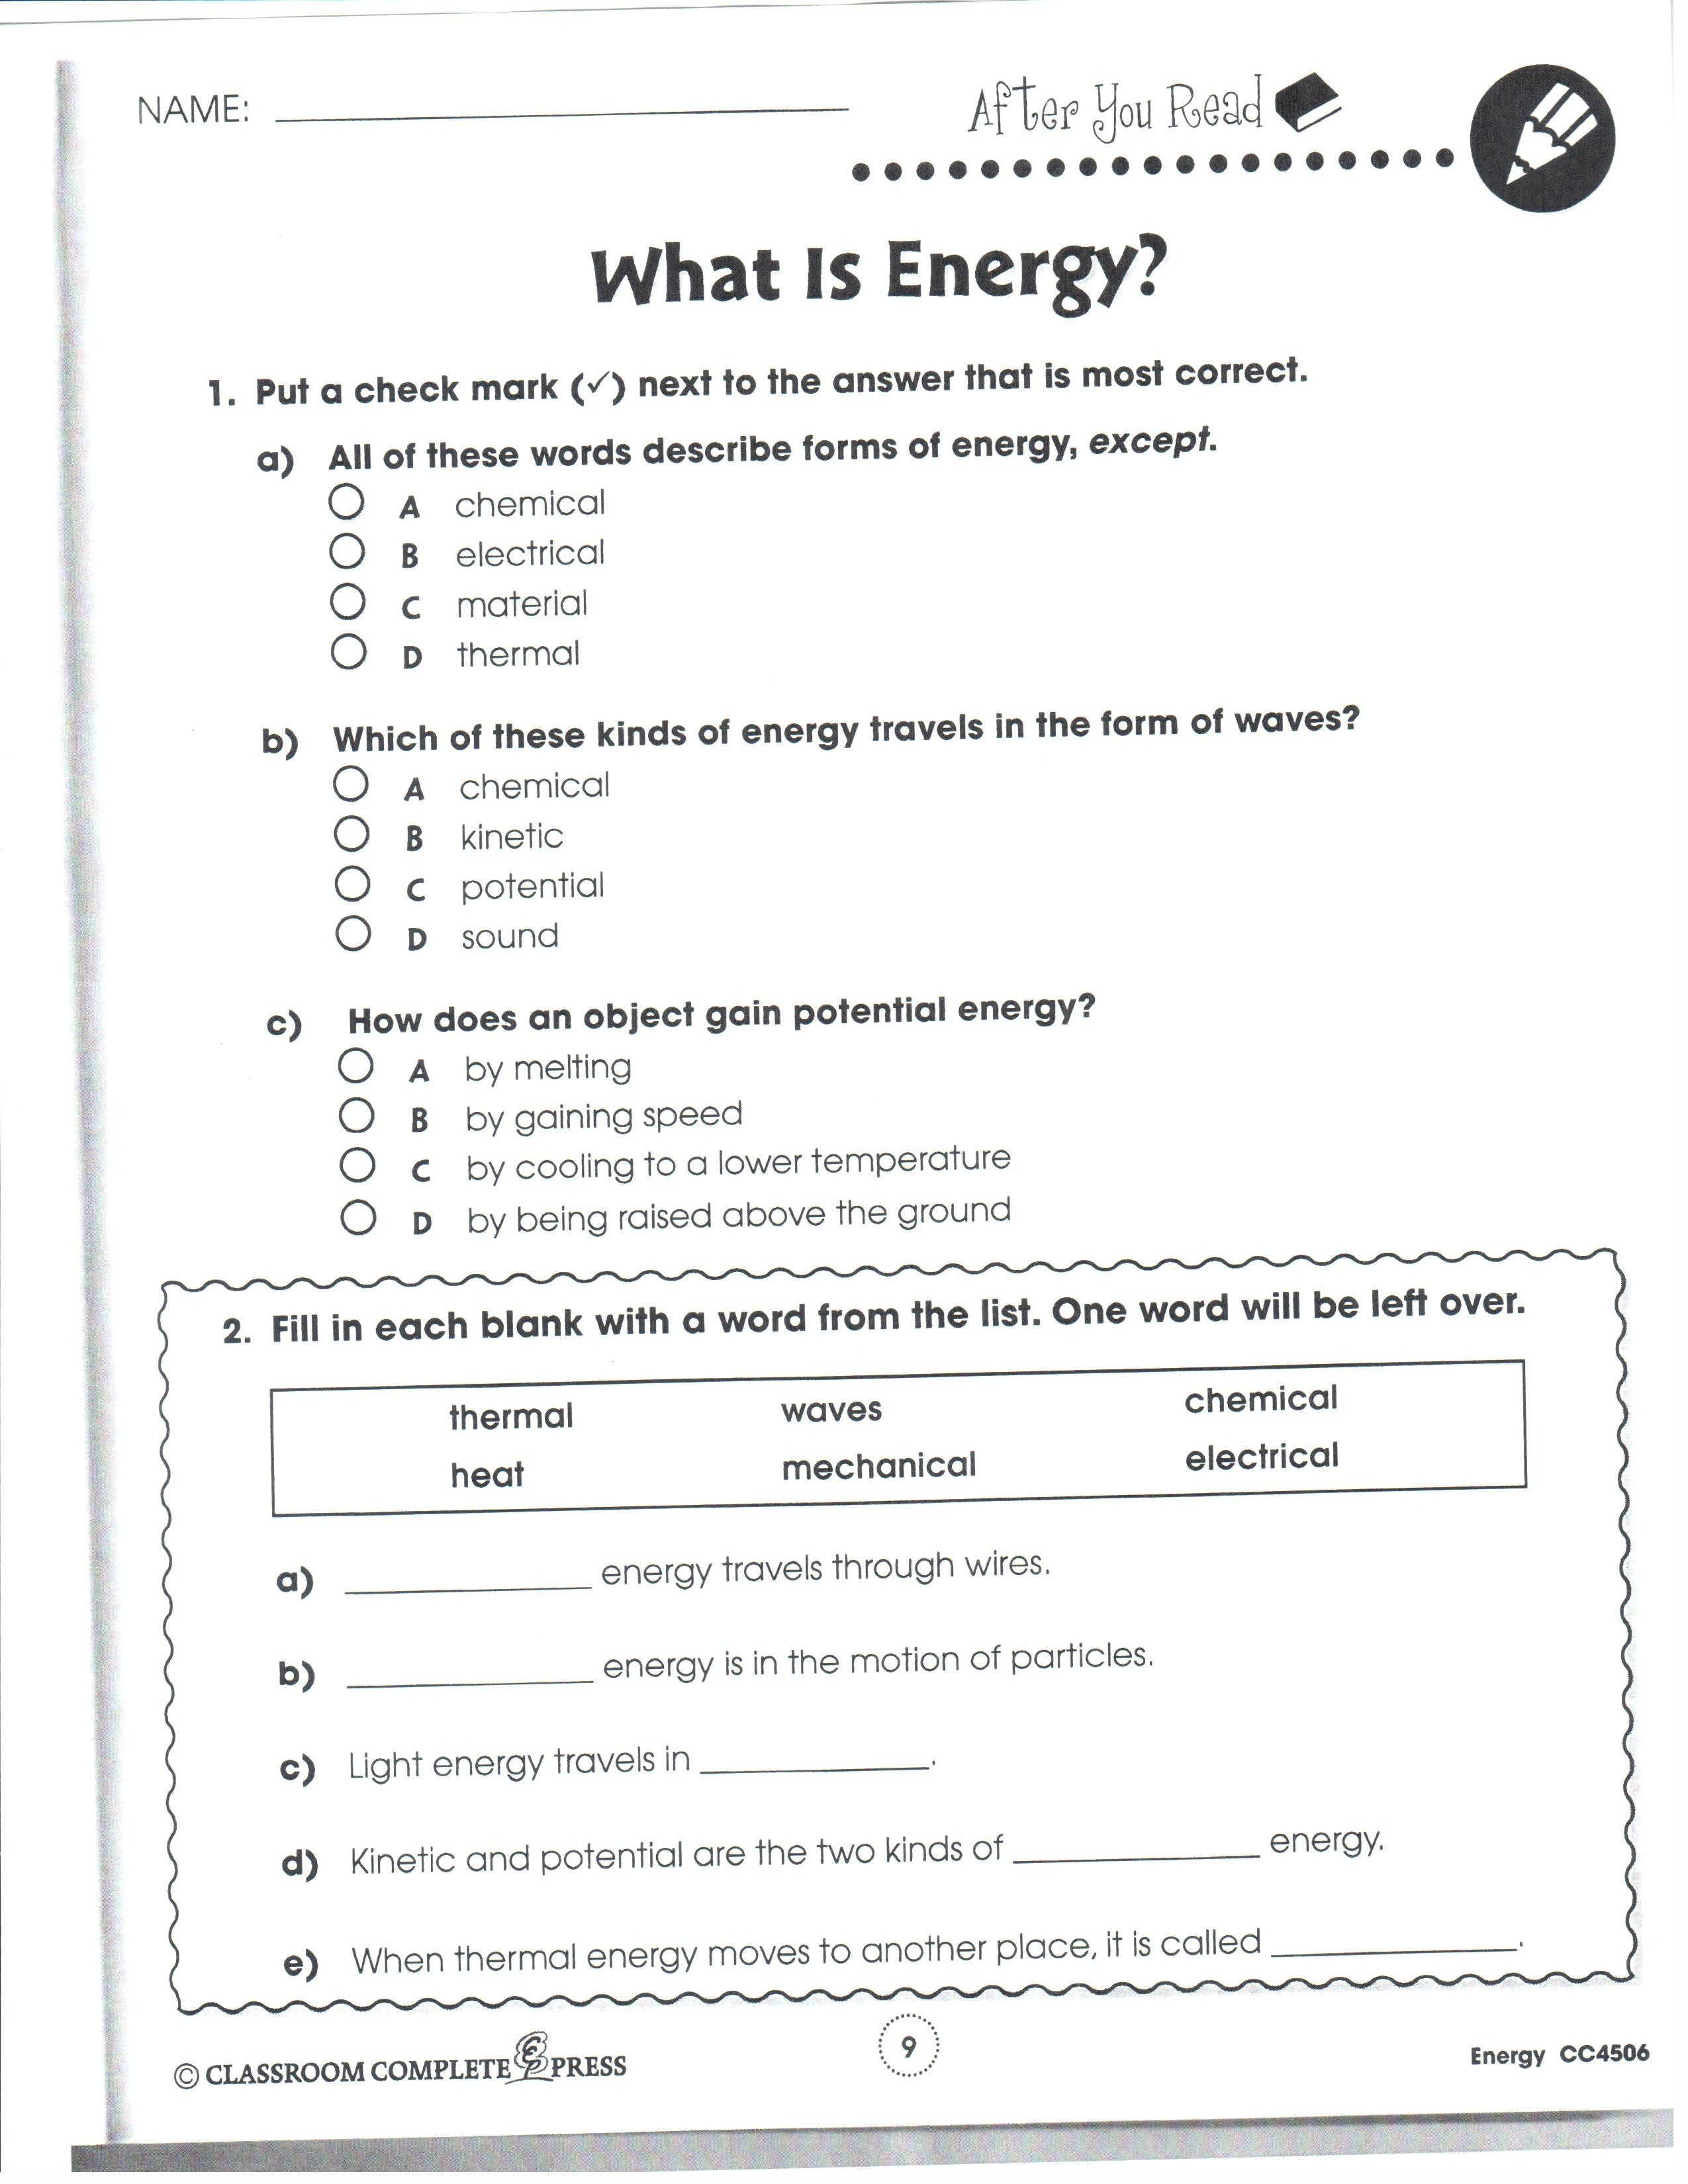 Free Printable Worksheets For Middle School Students | Middle School Printable Worksheets